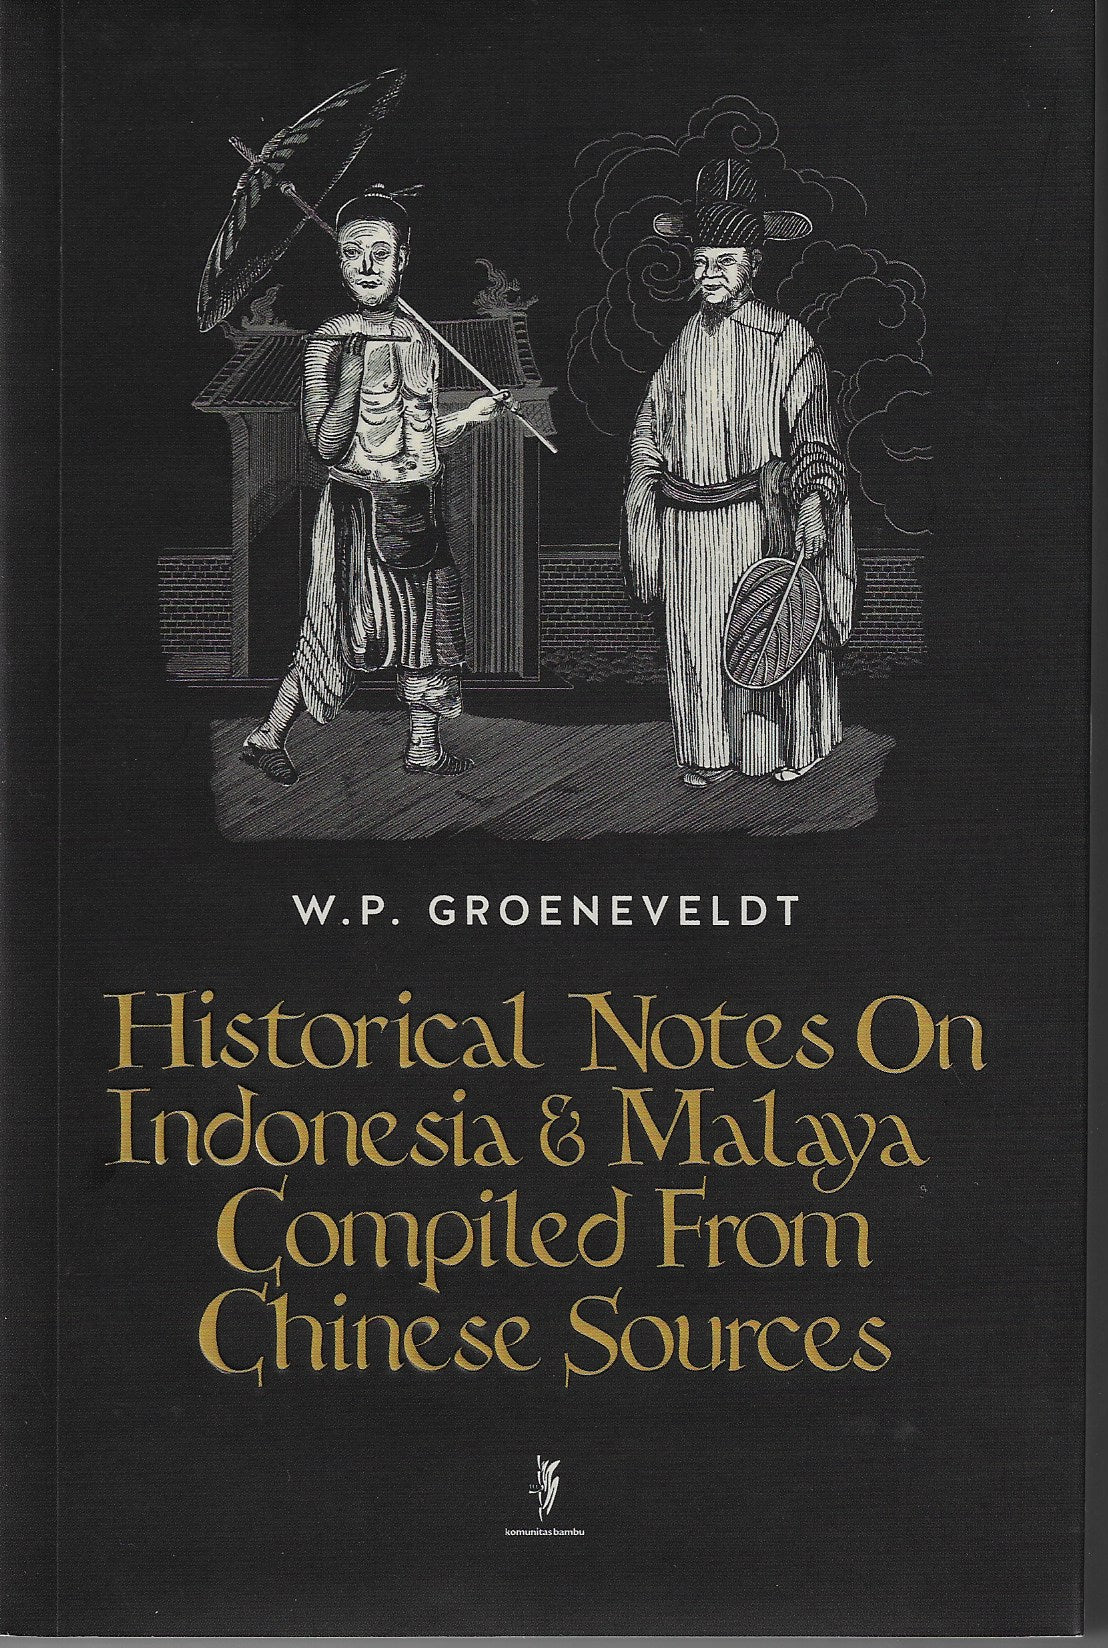 Historical Notes on Indonesia & Malaya Compiled from Chinese Sources